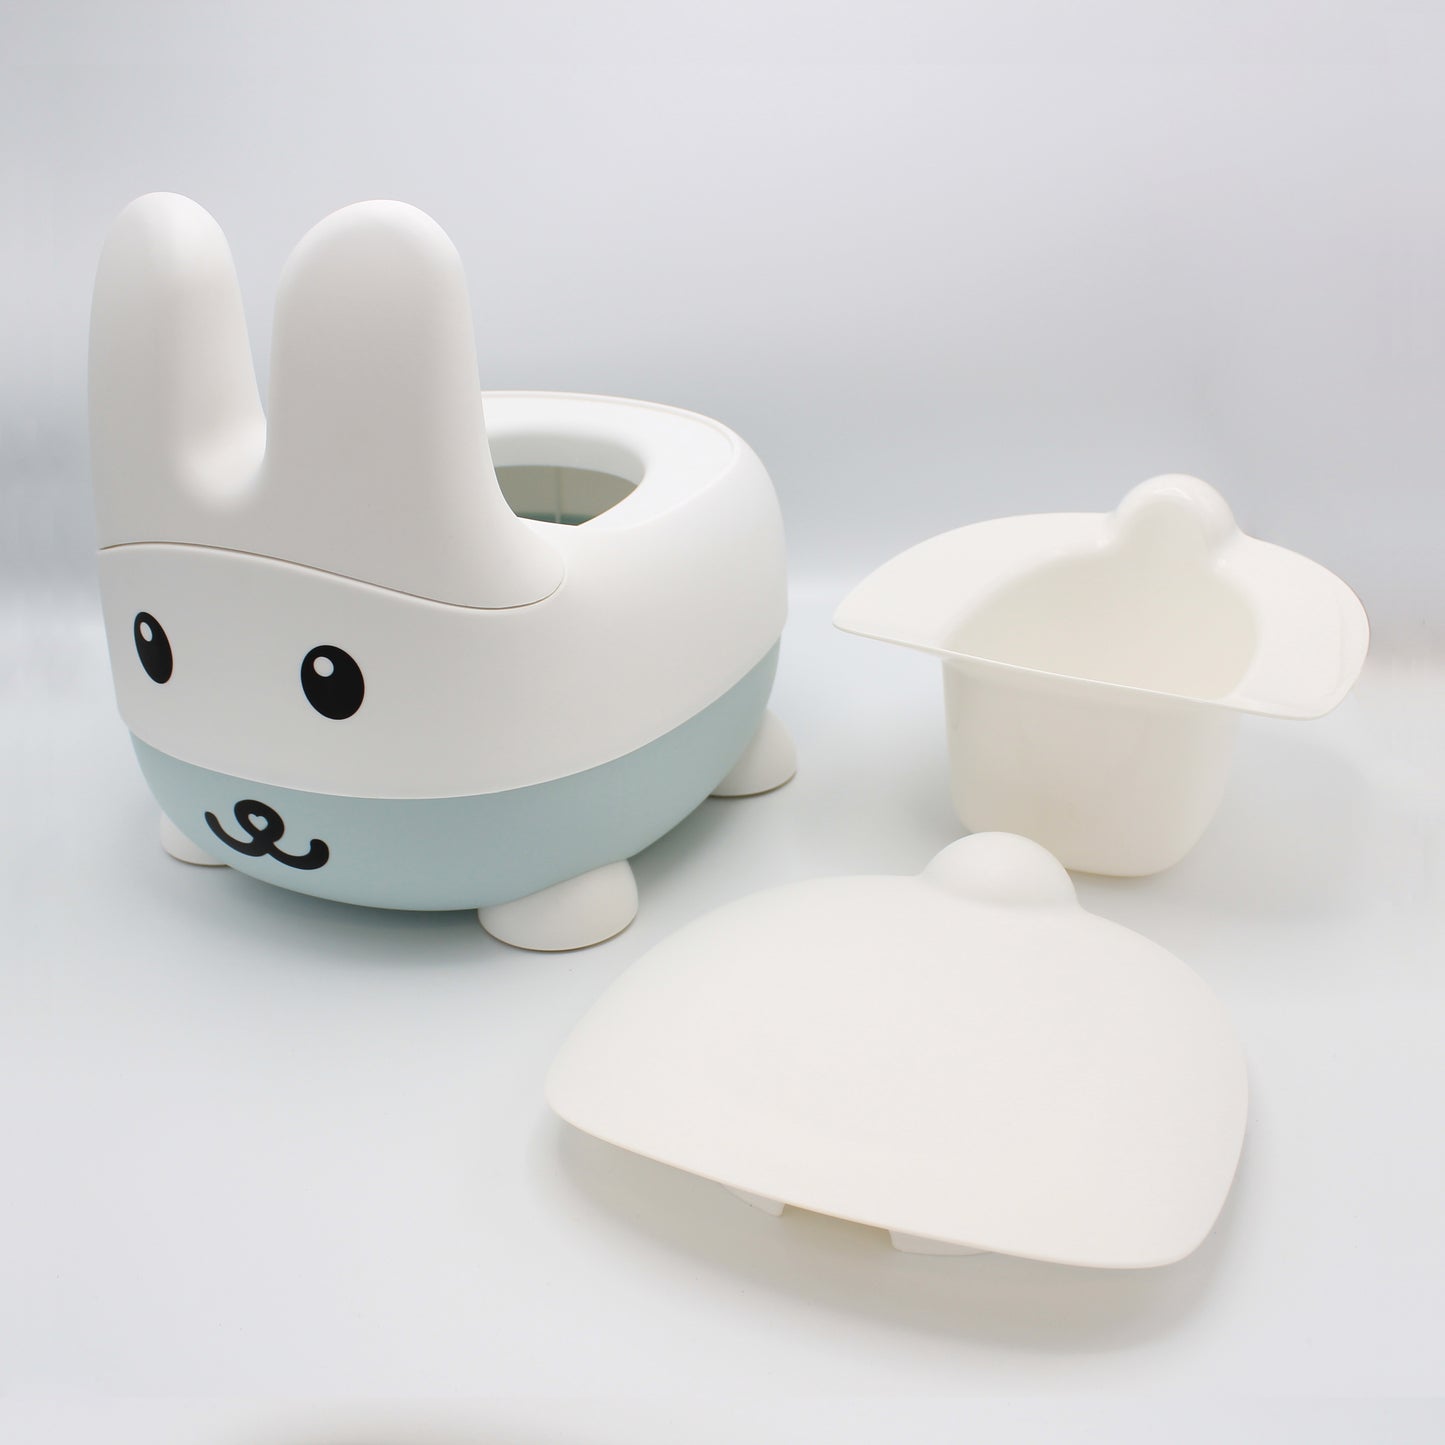 Bunny Training Potty with Back Rest, Removable Bowl & Lid